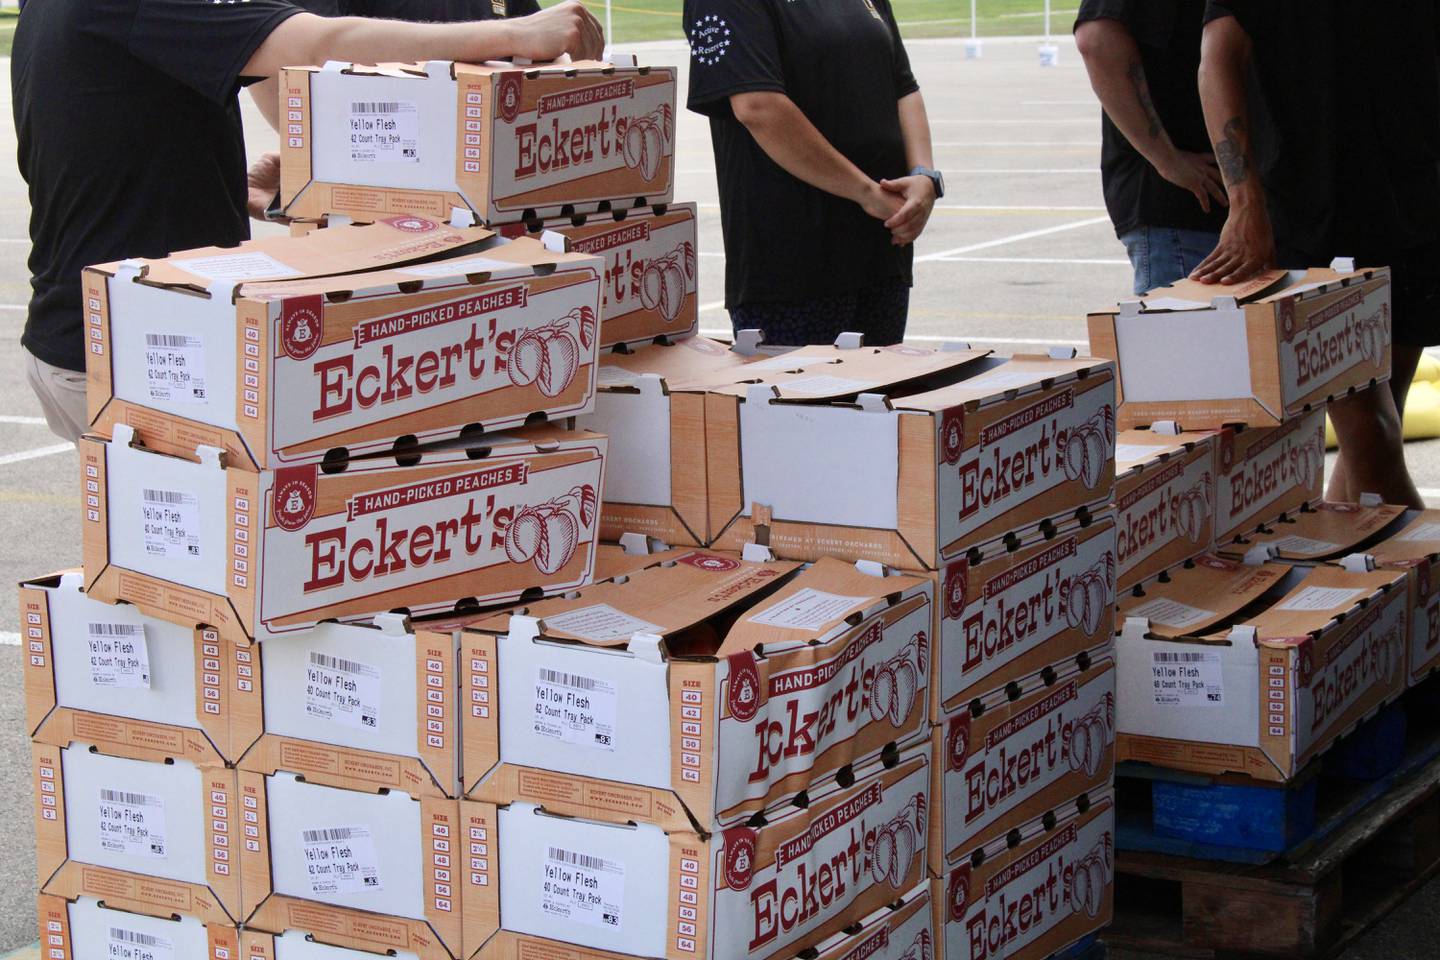 Illinois-grown peaches are stacked beneath a shade tent. Members of the U.S. Army Recruiting Station helped Kiwanis Club of Dixon to load the 22-pound boxes into cars during pickup on Thursday at Dixon High School.